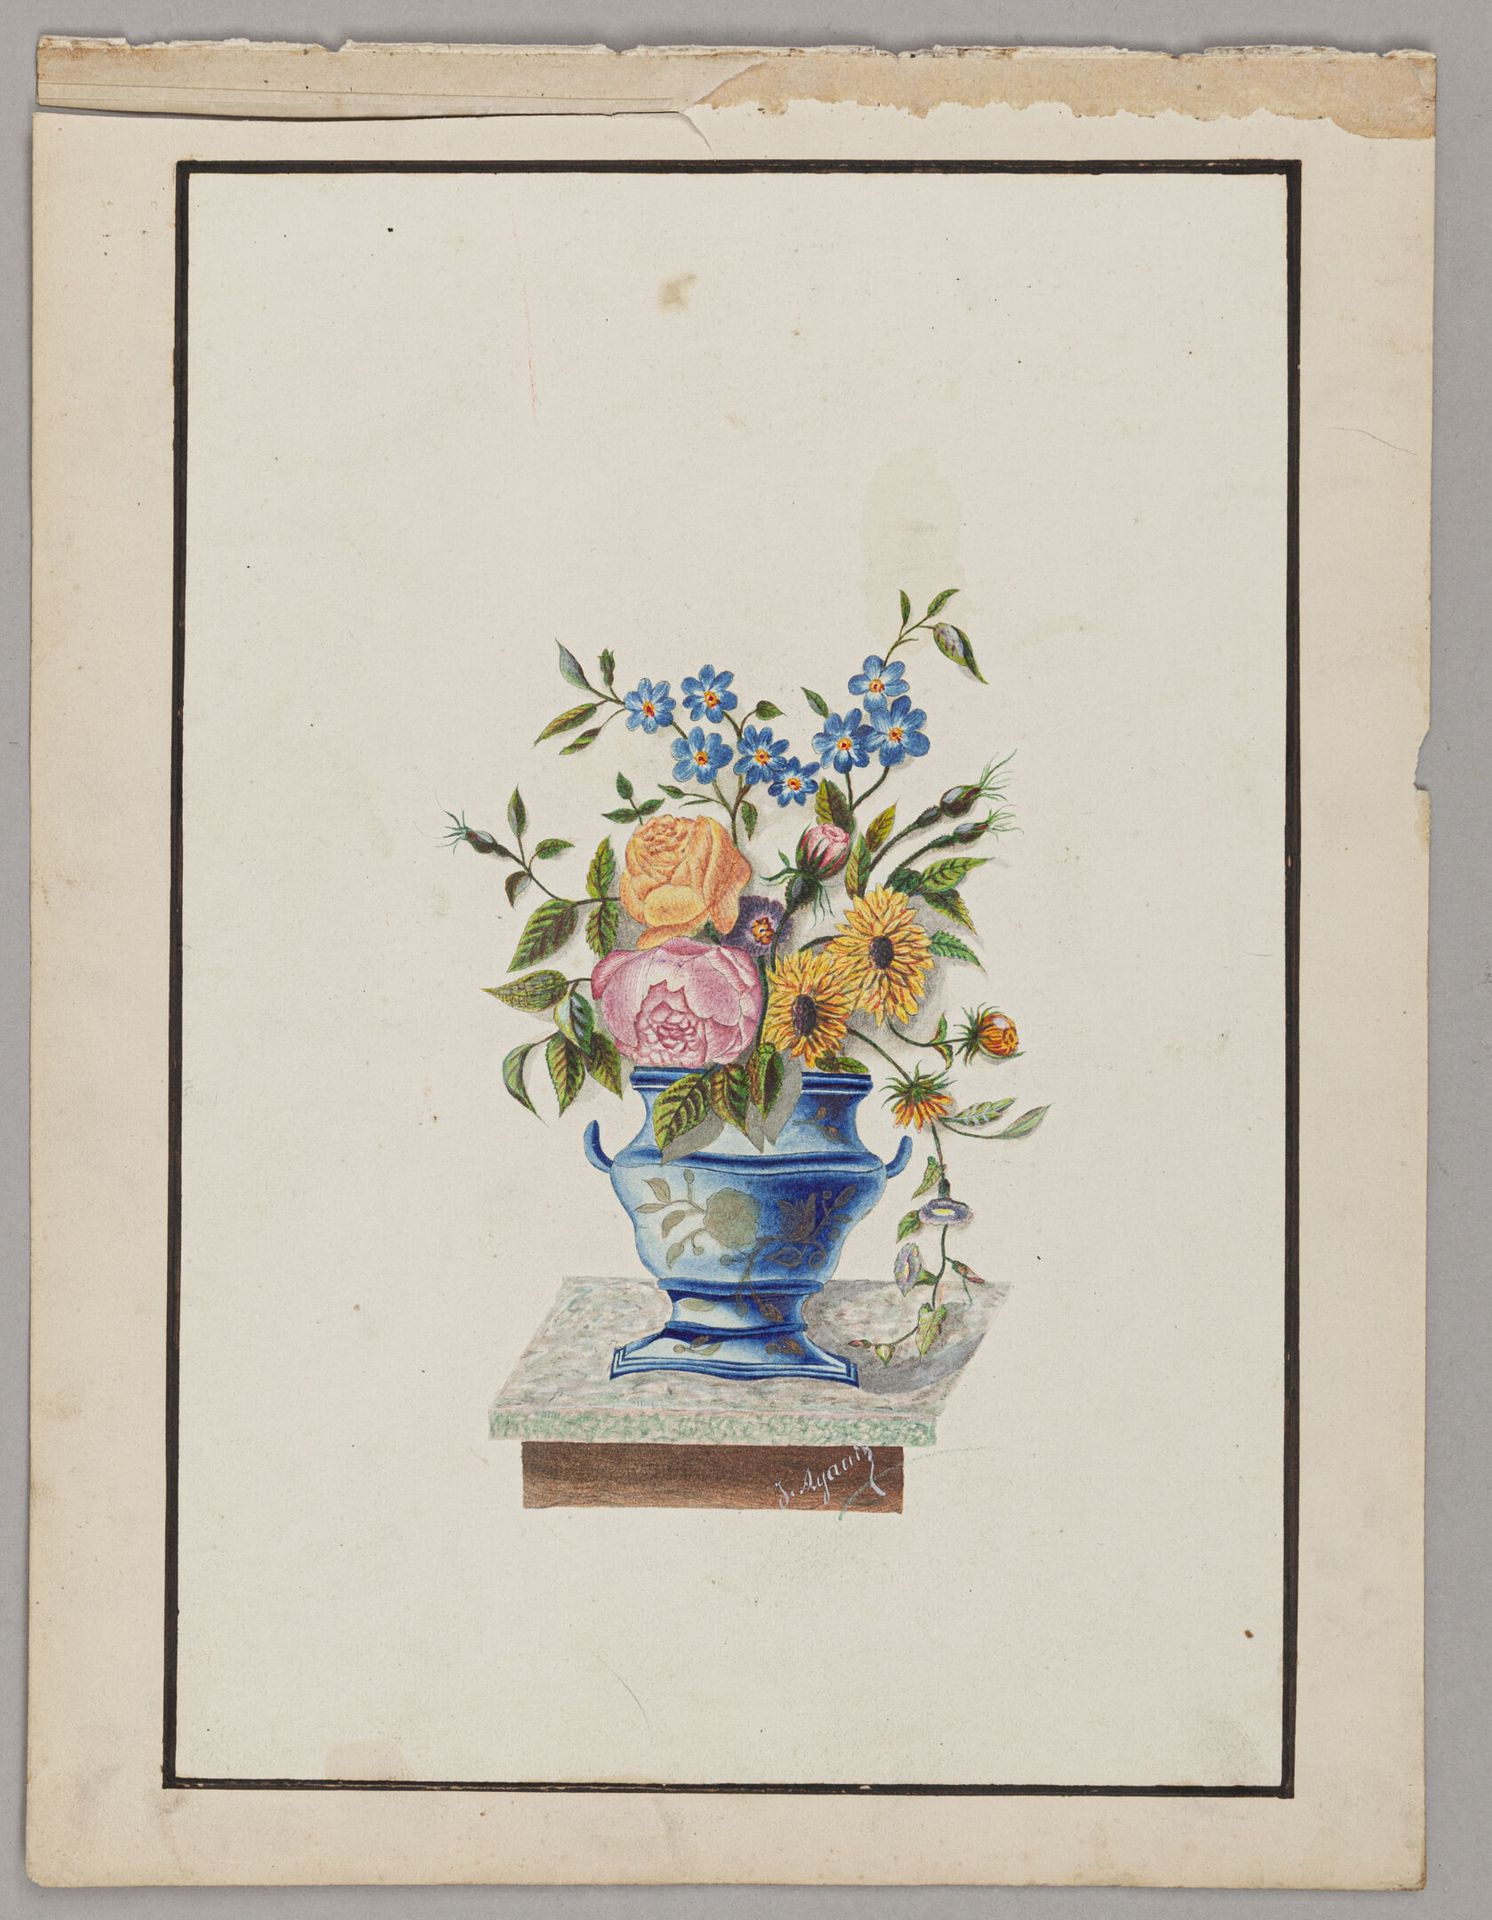 Null French school of the 19th century

Bouquets in a vase

Watercolor

H. 29 cm&hellip;